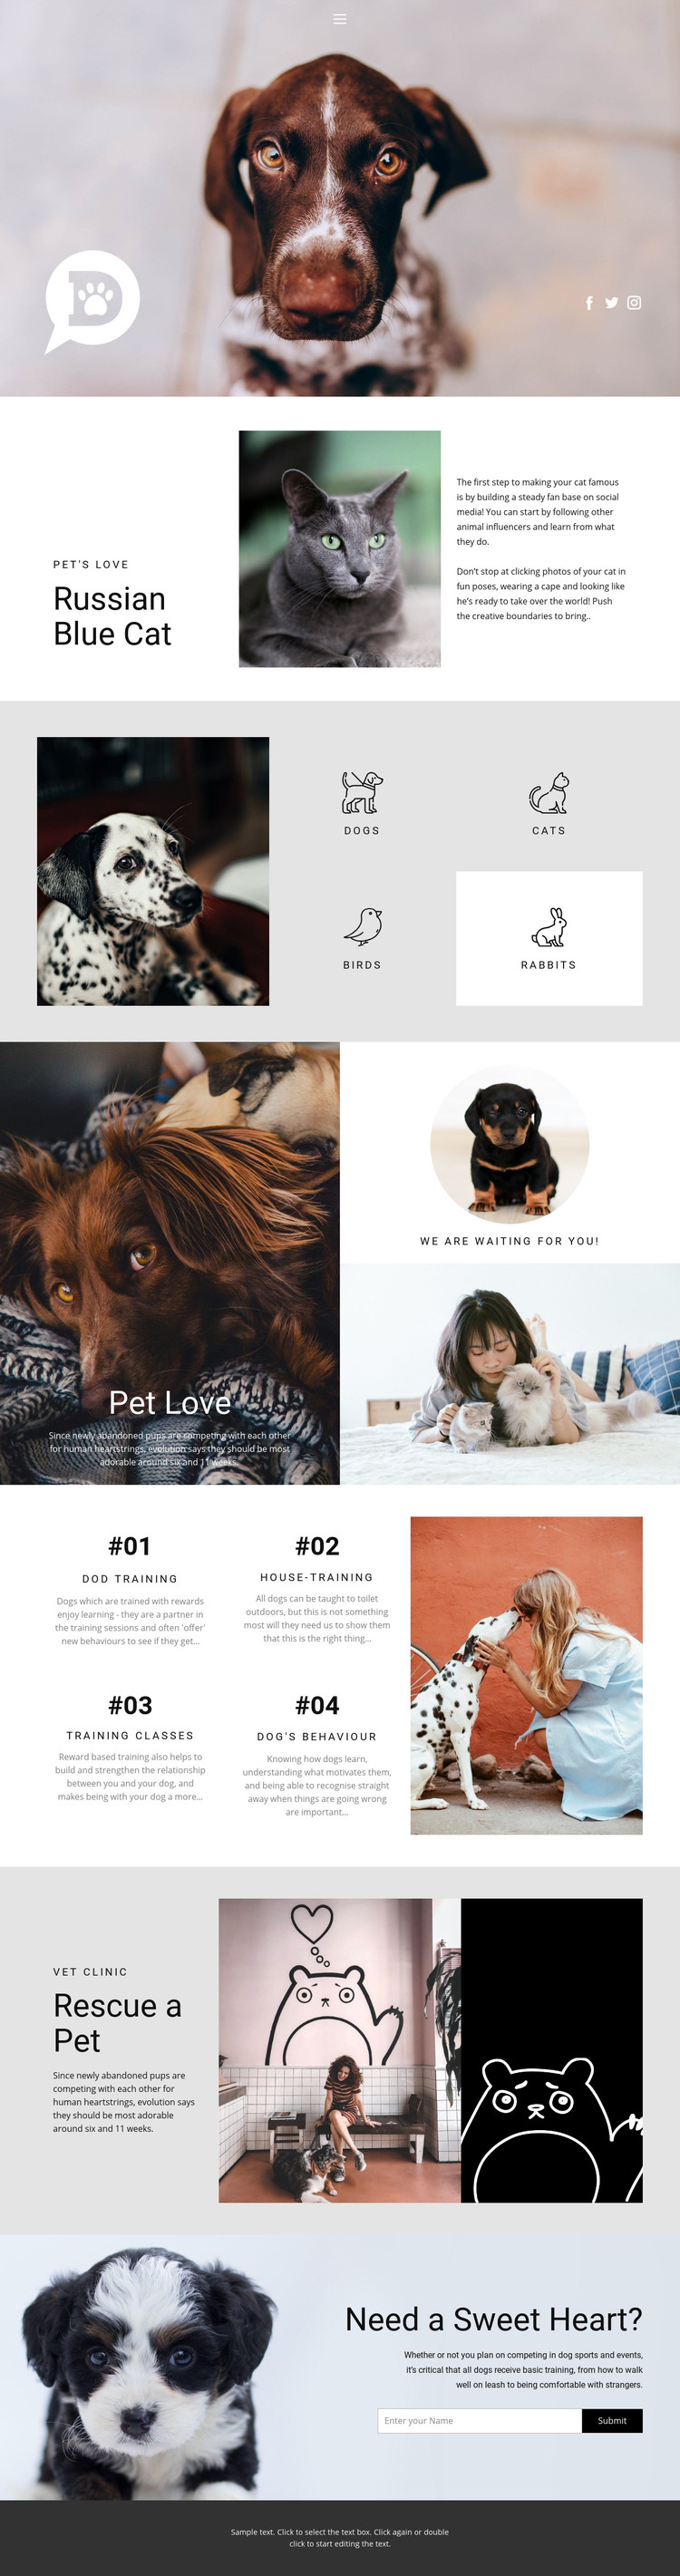 Care for pets and animals Homepage Design